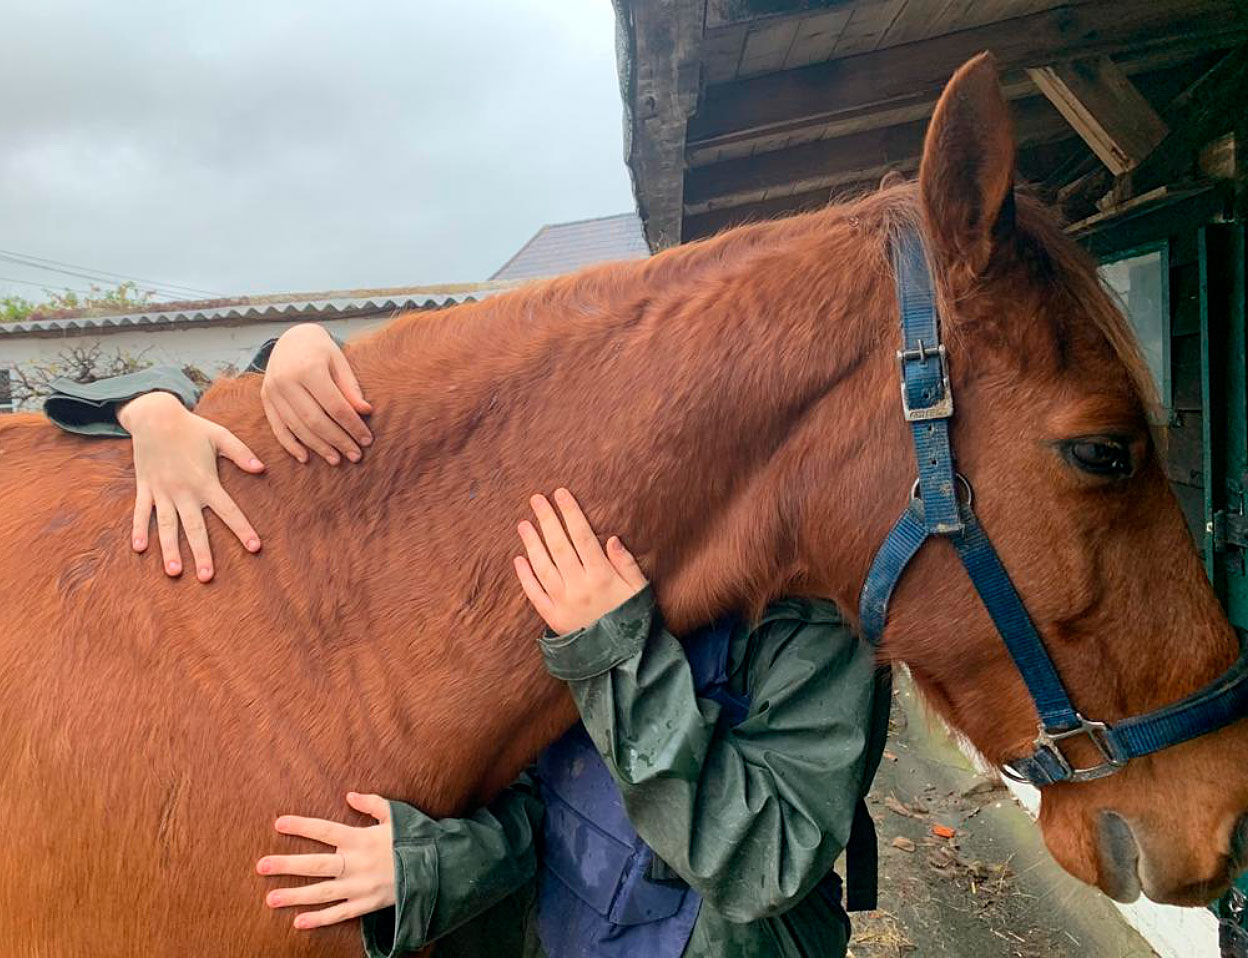 A horse being hugged by several hands